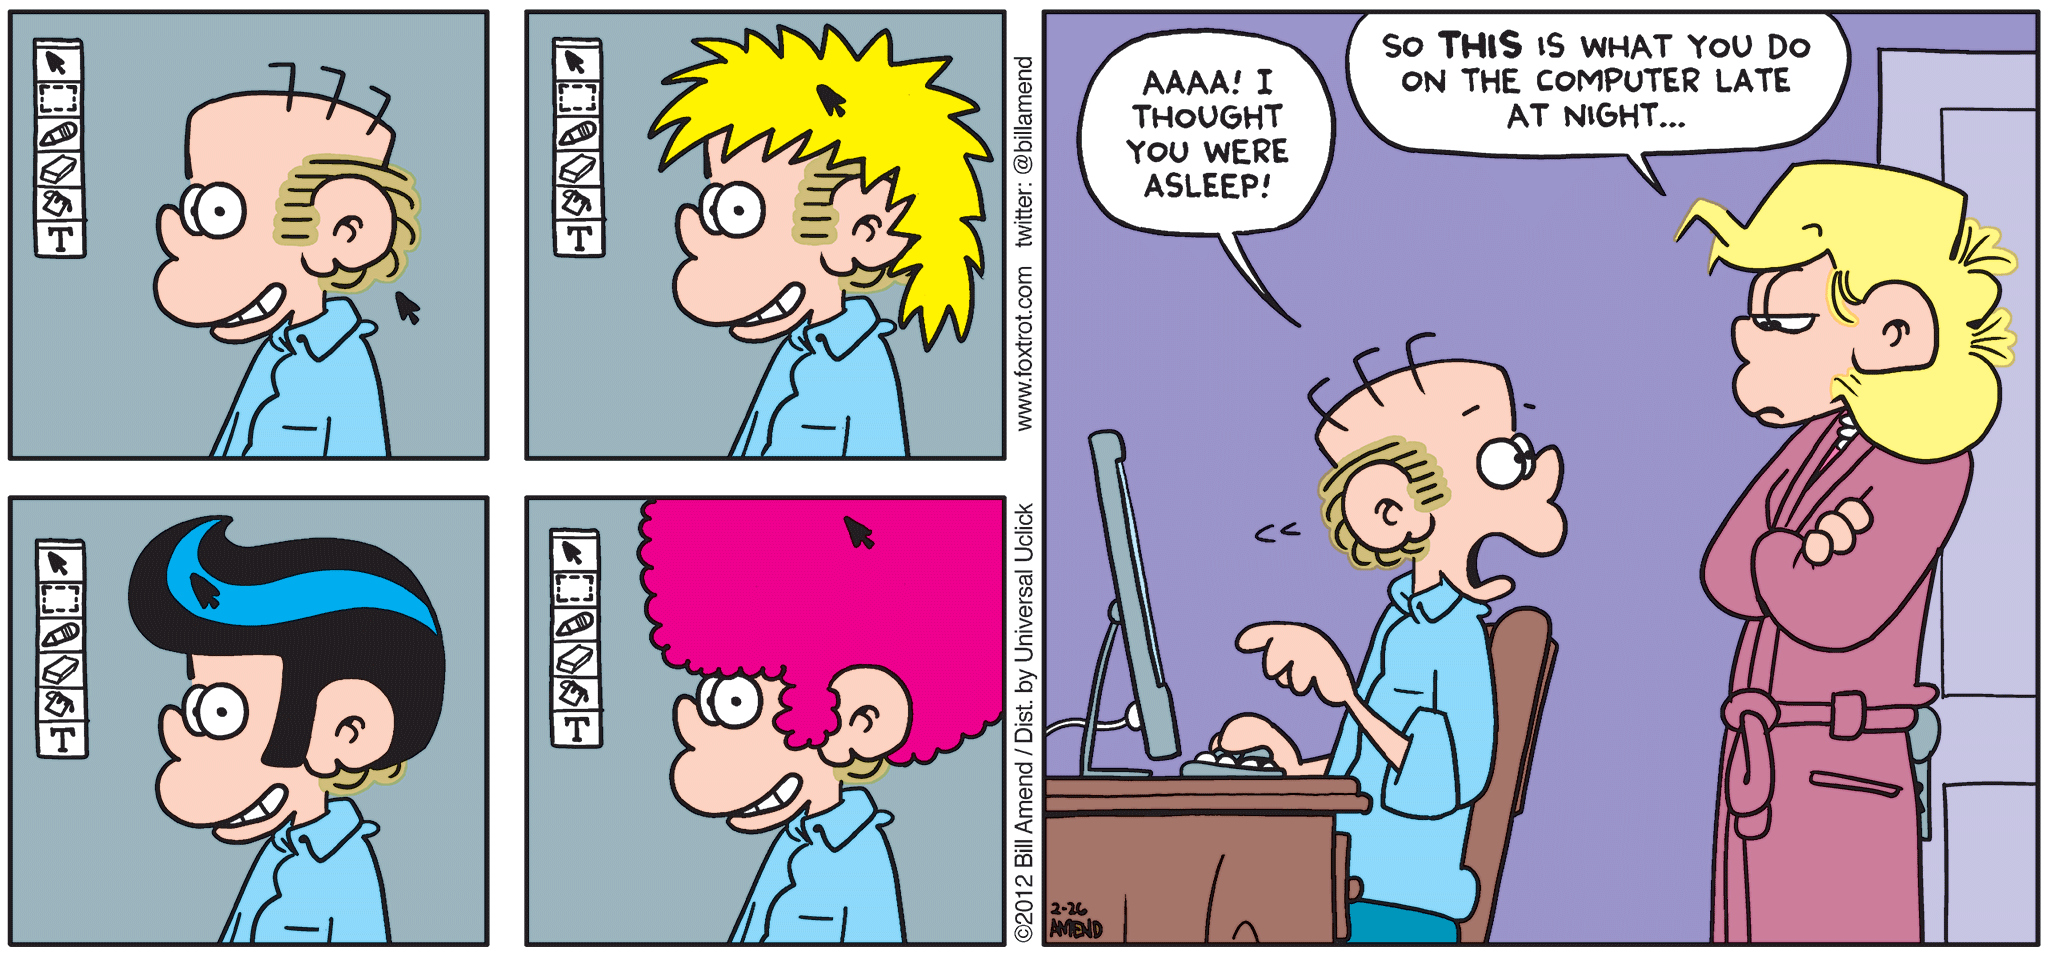 FoxTrot comic strip by Bill Amend - "Hair Paste" published February 26, 2012 - Roger: Aaaa! I thought you were asleep! Andy: So THIS is what you do on the computer late at night...